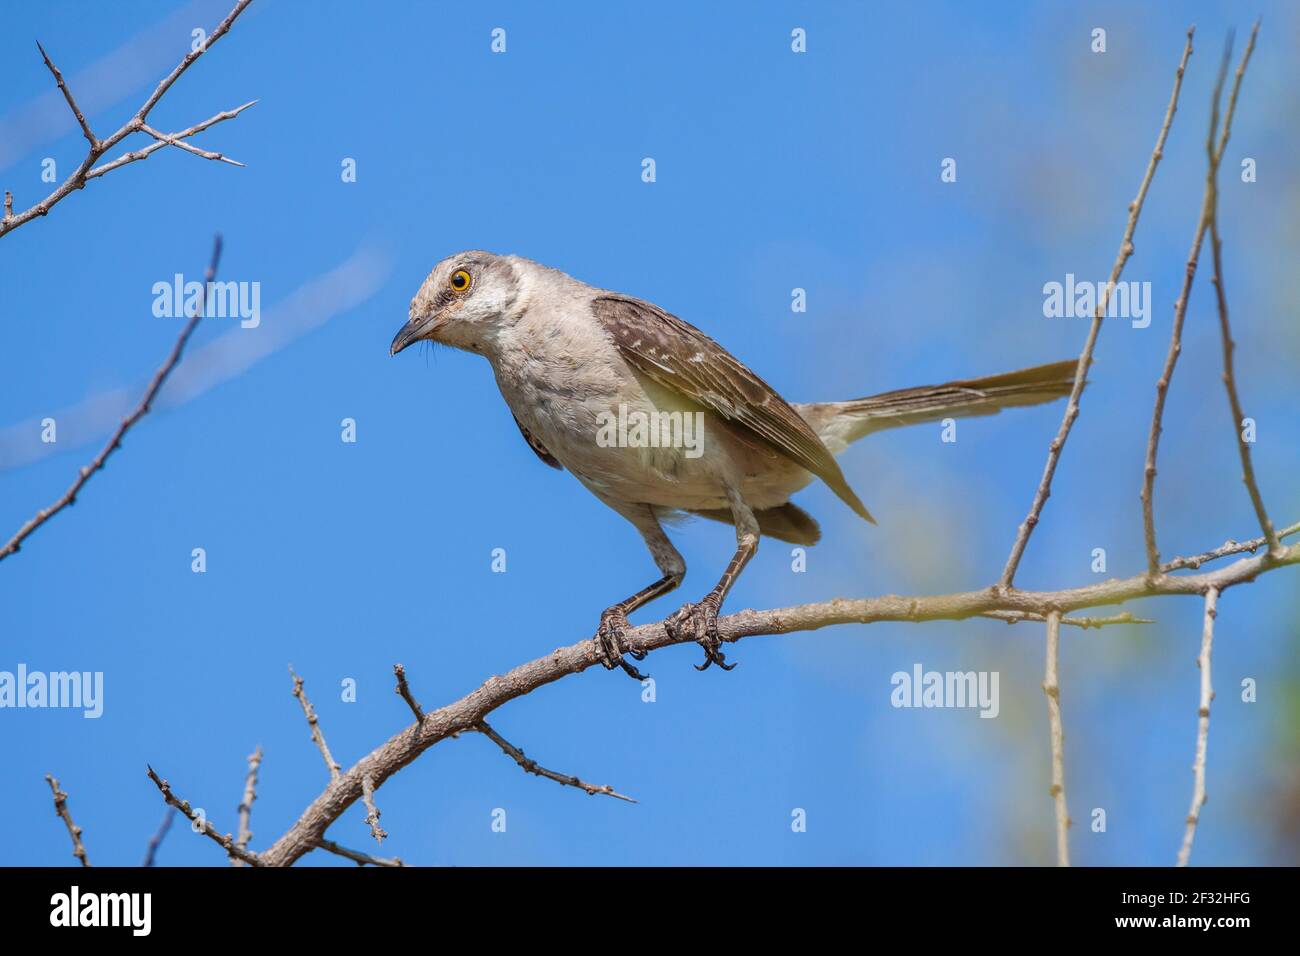 Northern Mockingbird, Mimus polyglottos, the only mockingbird commonly found in North America, looking down from a perch, on a ranch in South Texas. Stock Photo